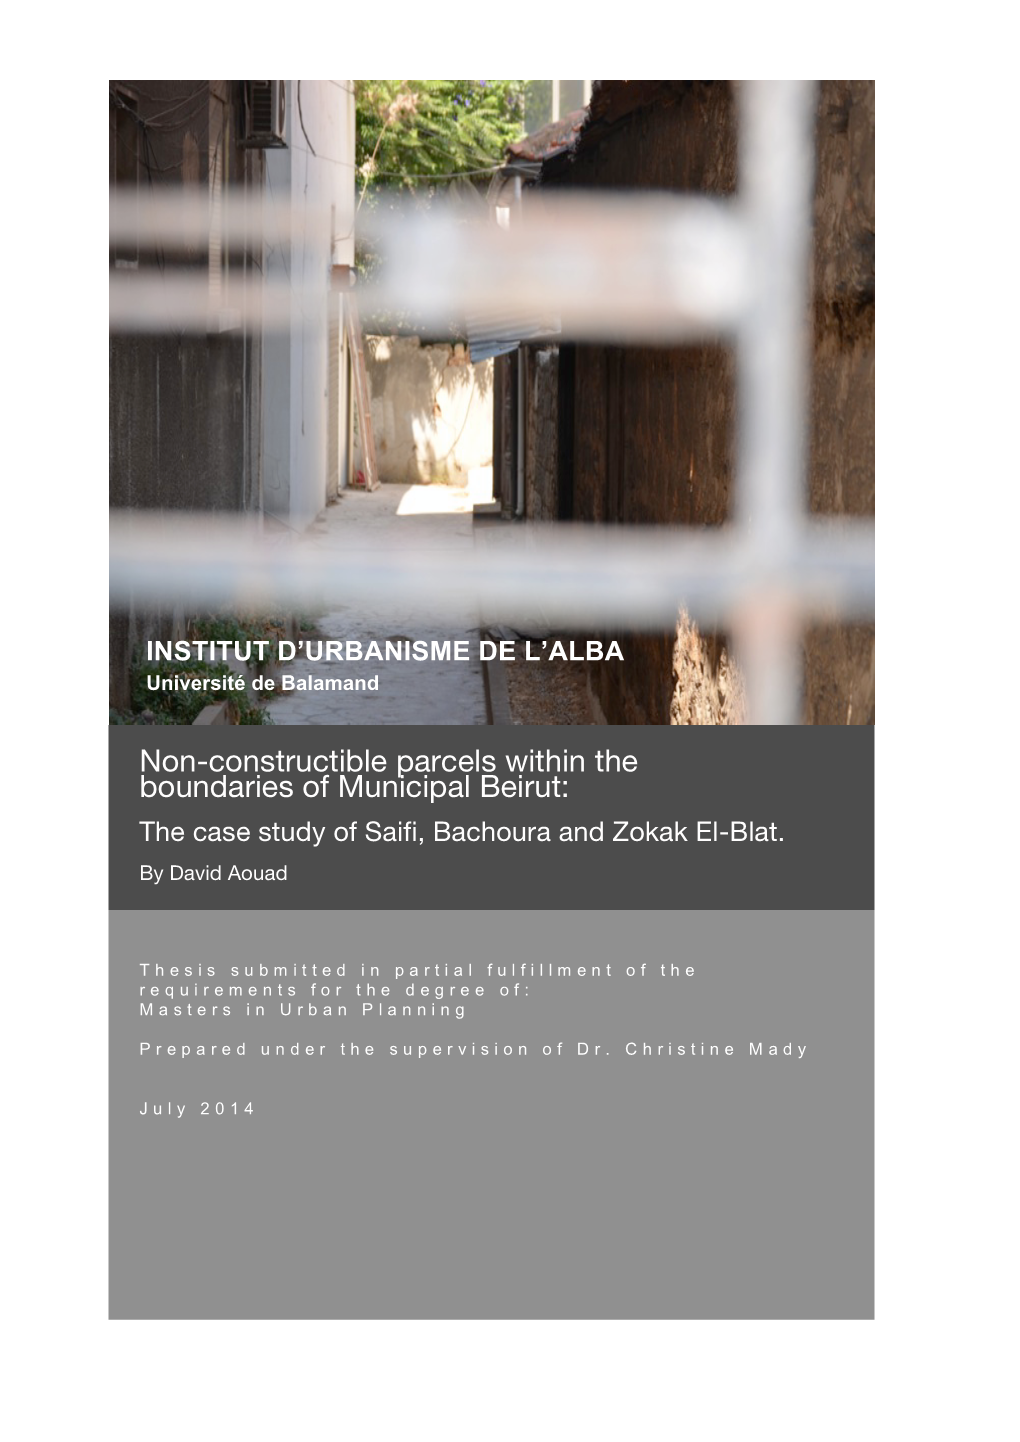 Non-Constructible Parcels Within the Boundaries of Municipal Beirut: the Case Study of Saifi, Bachoura and Zokak El-Blat